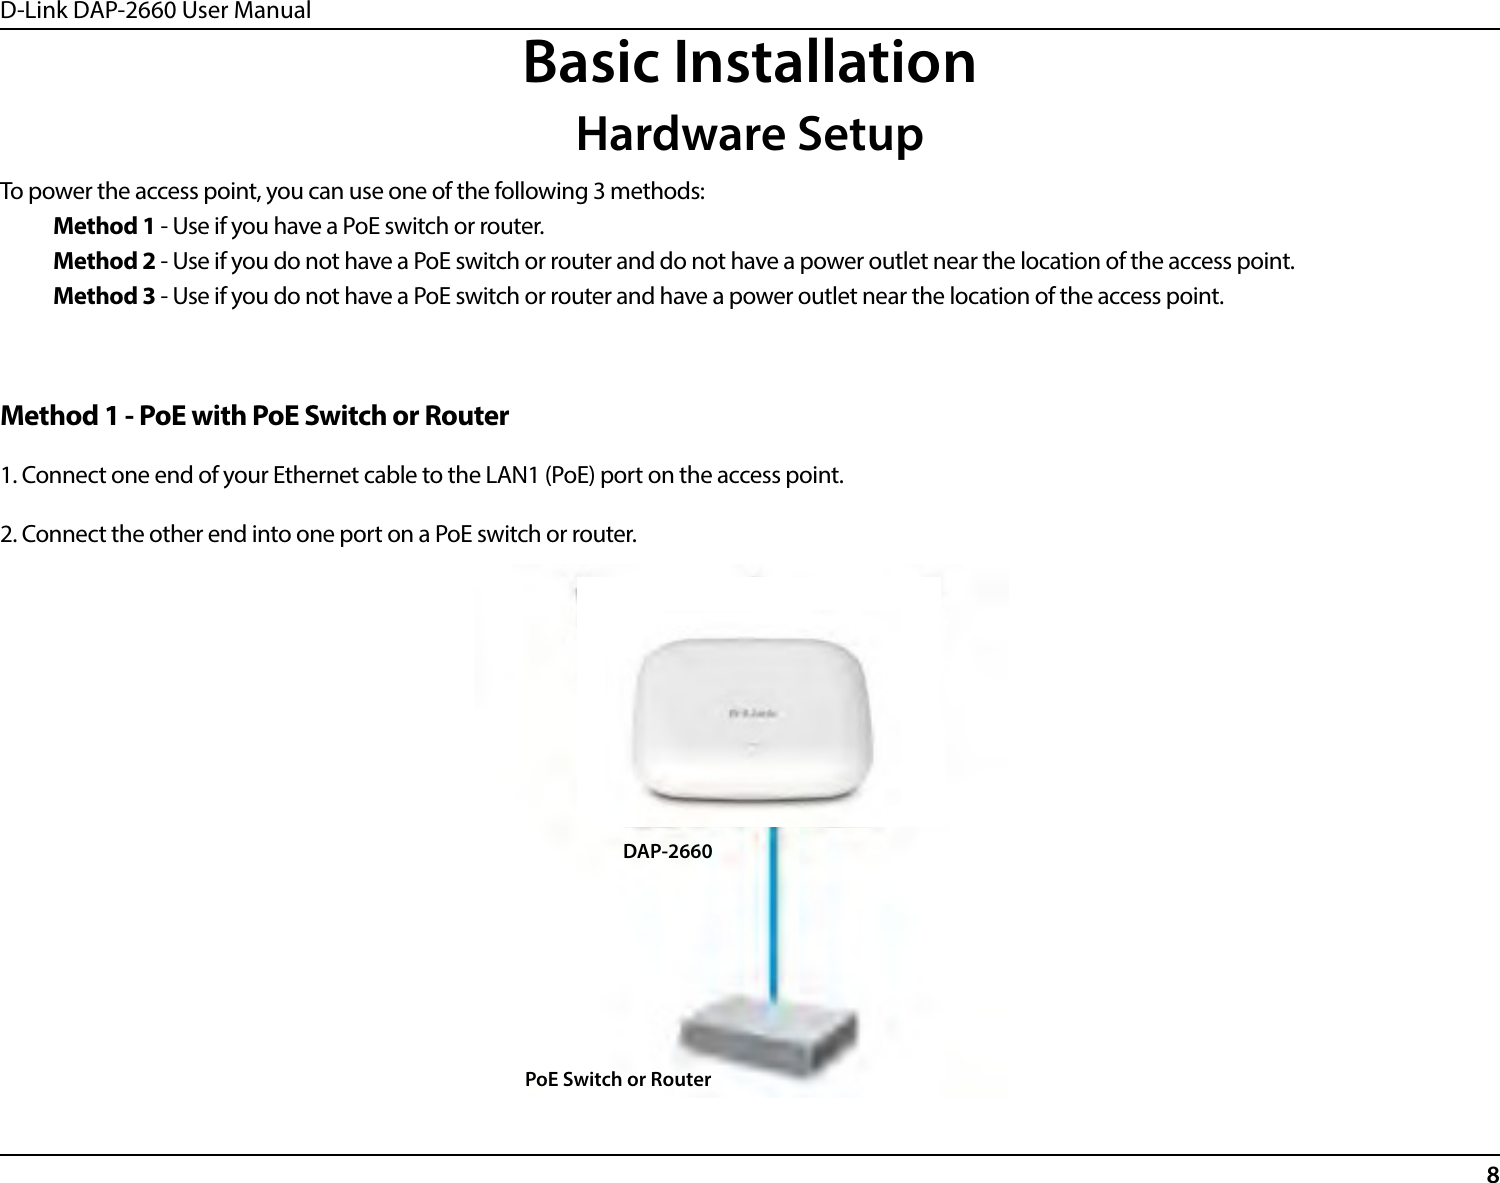 D-Link DAP-2660 User Manual8Basic InstallationHardware SetupTo power the access point, you can use one of the following 3 methods:Method 1 - Use if you have a PoE switch or router.Method 2 - Use if you do not have a PoE switch or router and do not have a power outlet near the location of the access point.Method 3 - Use if you do not have a PoE switch or router and have a power outlet near the location of the access point.DAP-2660PoE Switch or RouterMethod 1 - PoE with PoE Switch or Router1. Connect one end of your Ethernet cable to the LAN1 (PoE) port on the access point.2. Connect the other end into one port on a PoE switch or router.